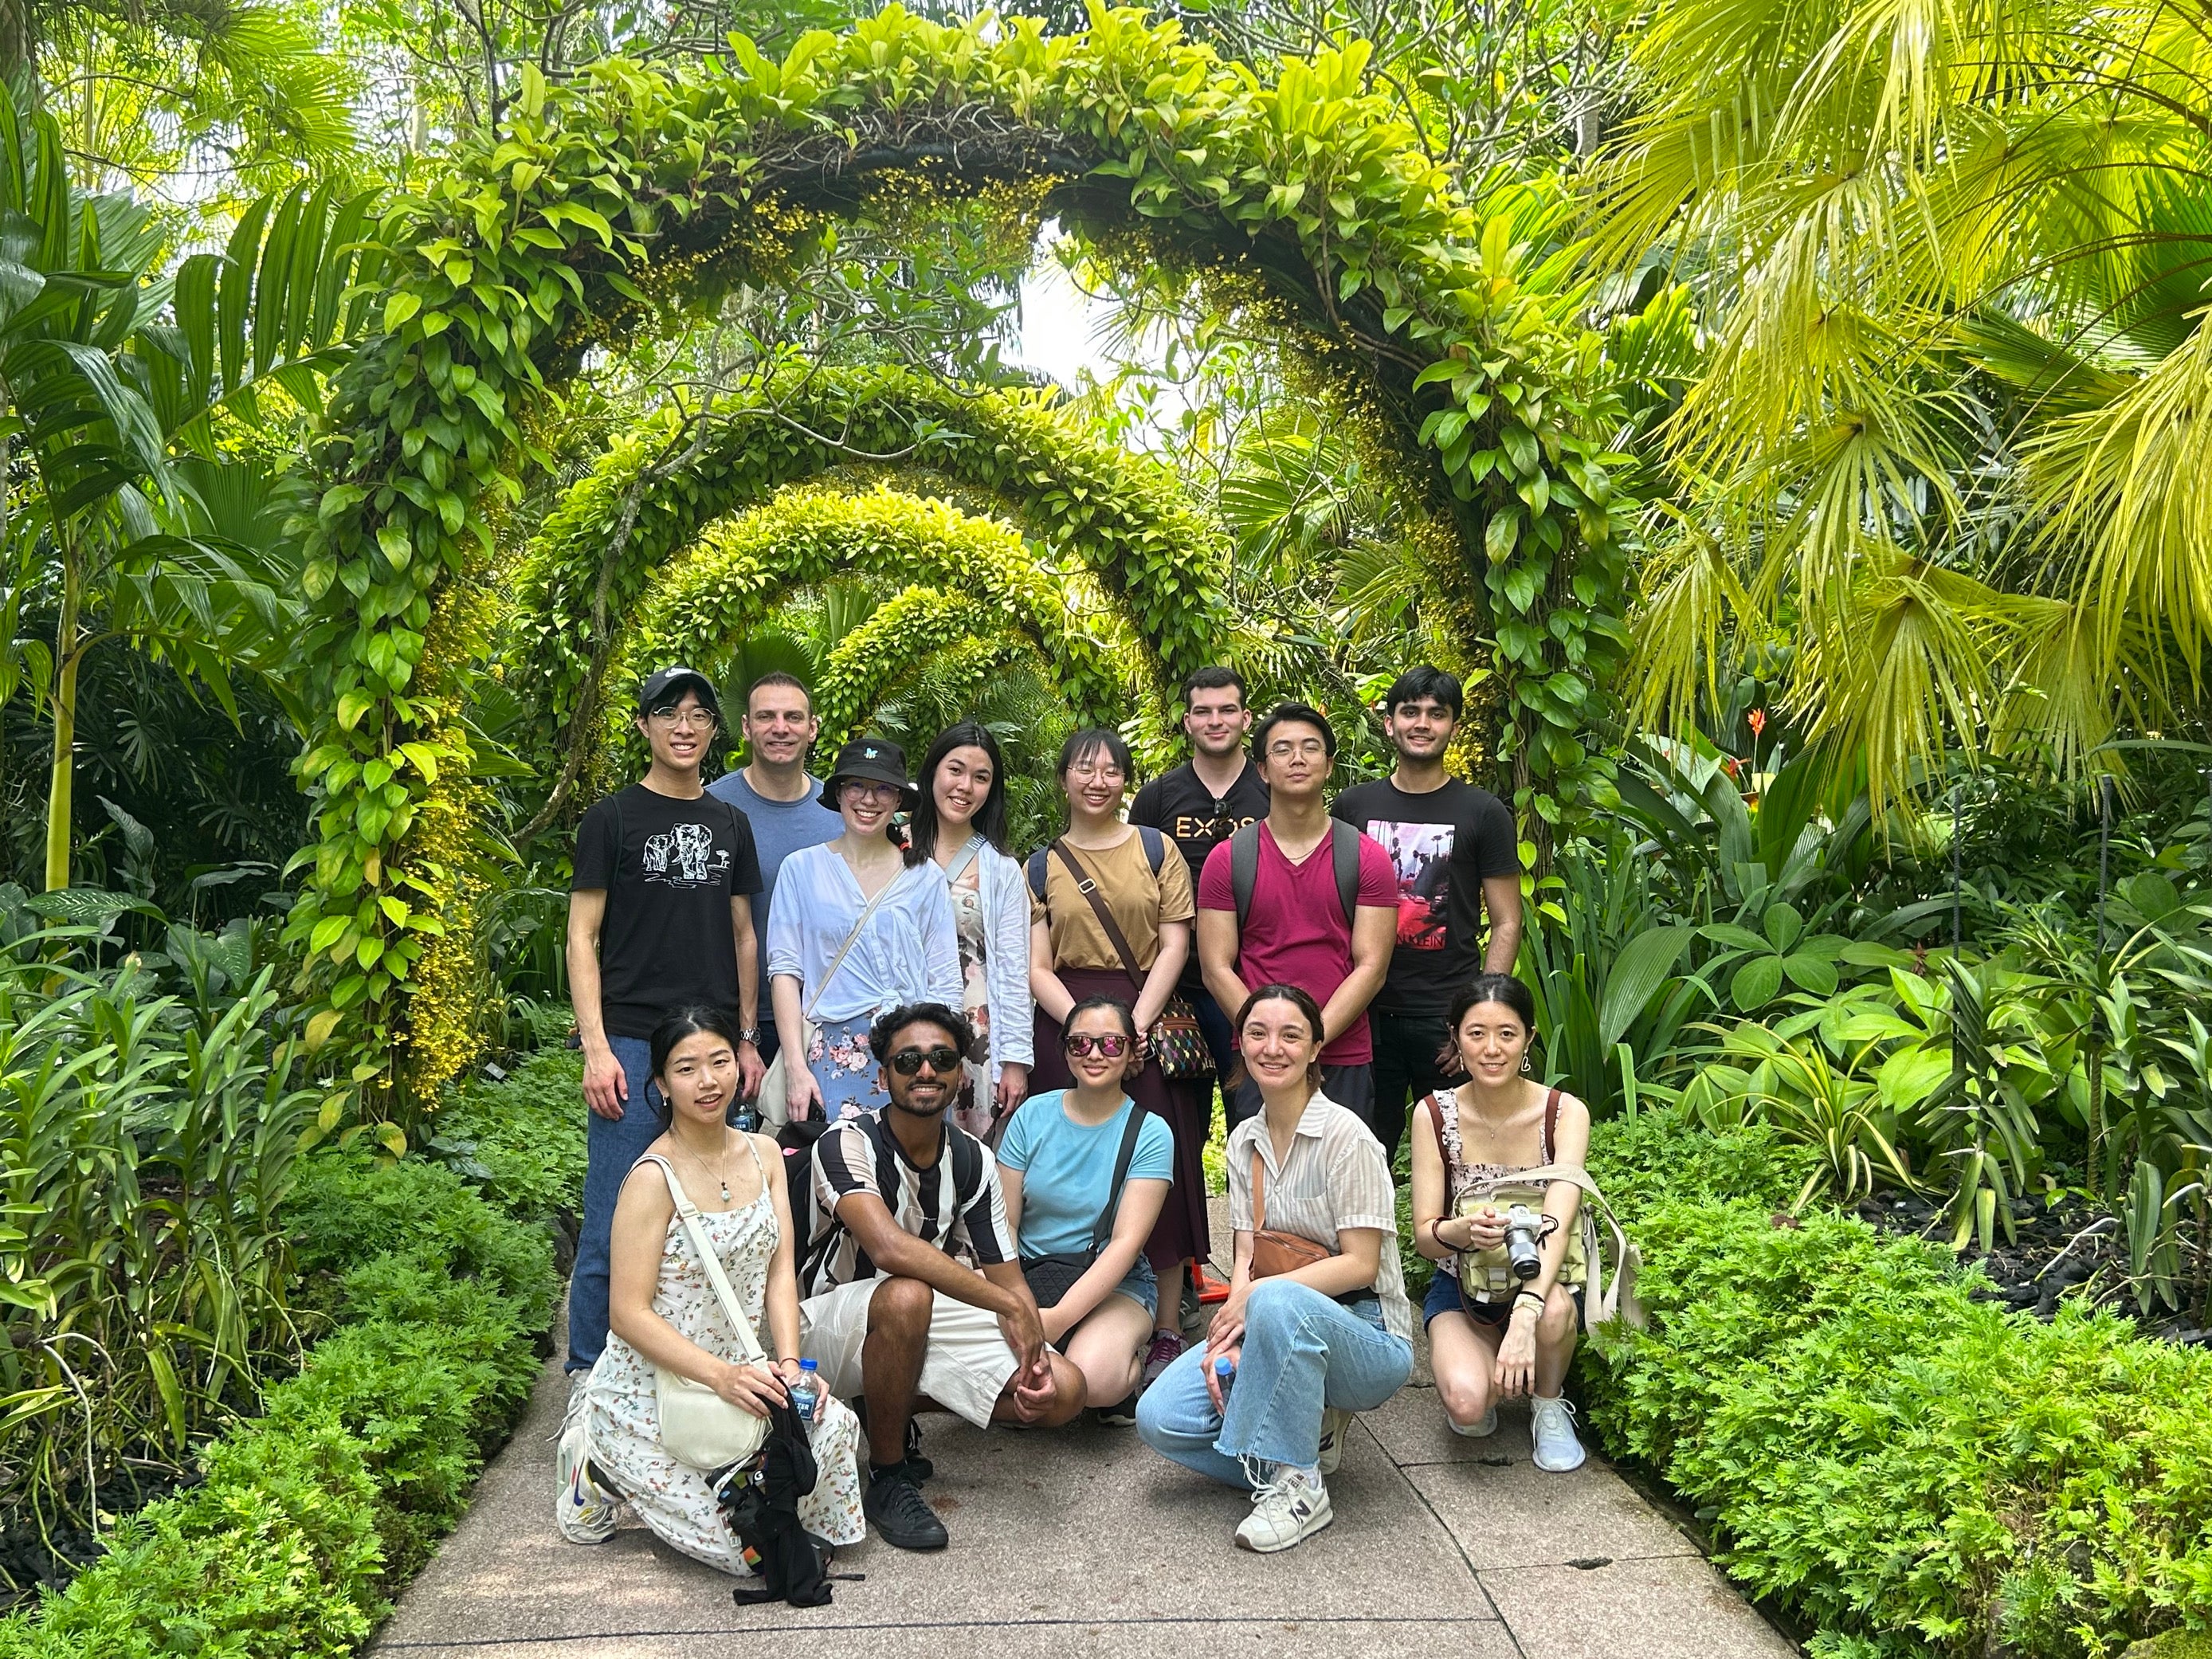 The Singapore team standing in the Singapore gardens